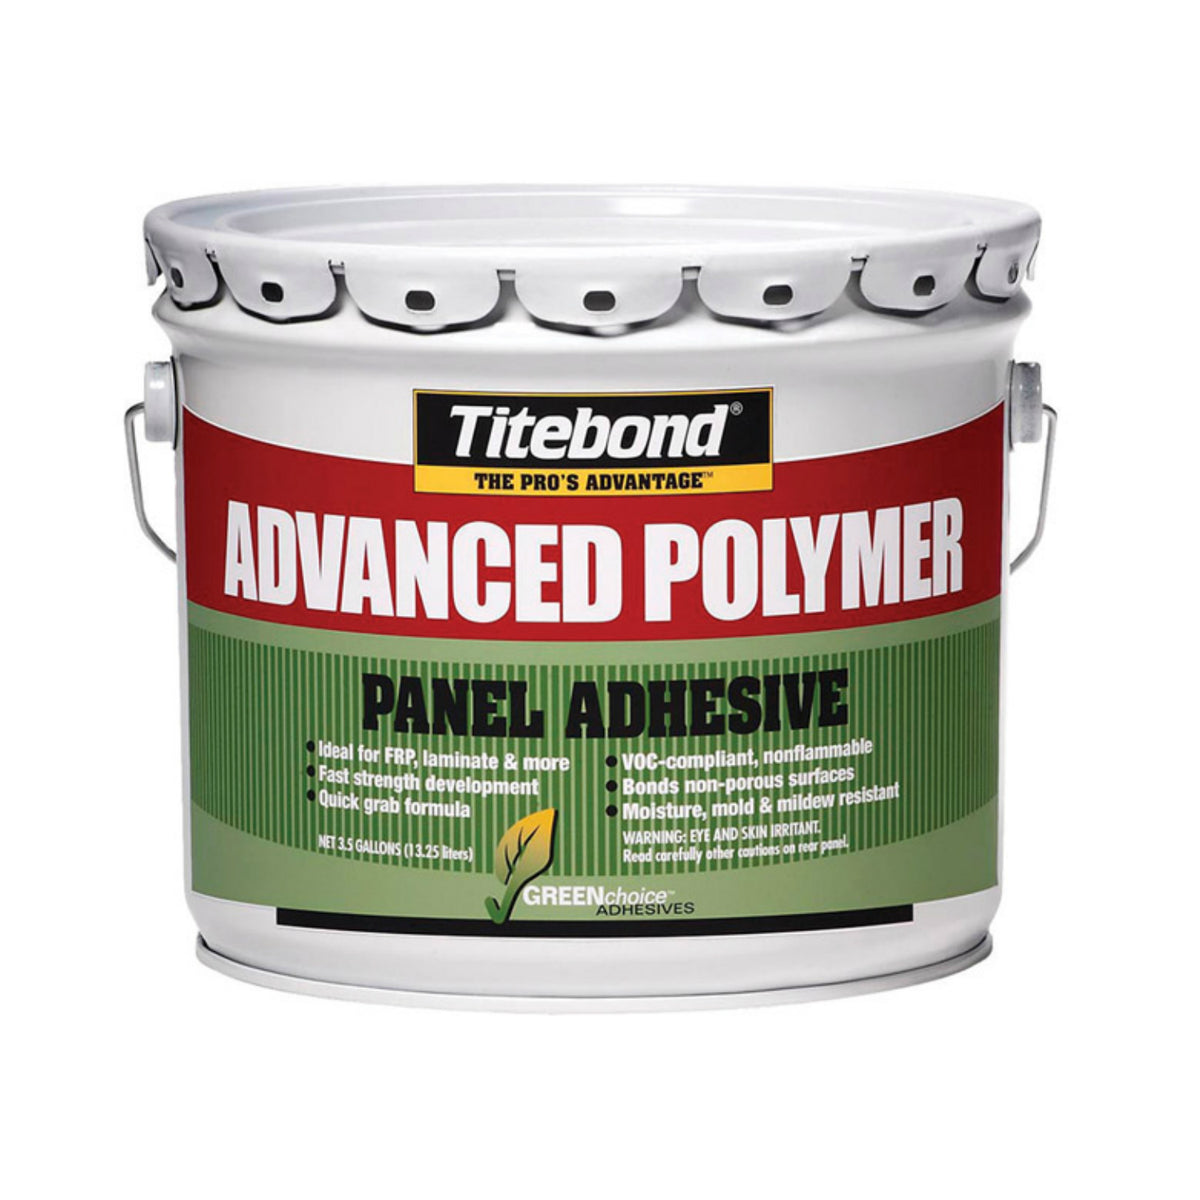 Buy titebond 4319 - Online store for sundries, frp panel in USA, on sale, low price, discount deals, coupon code